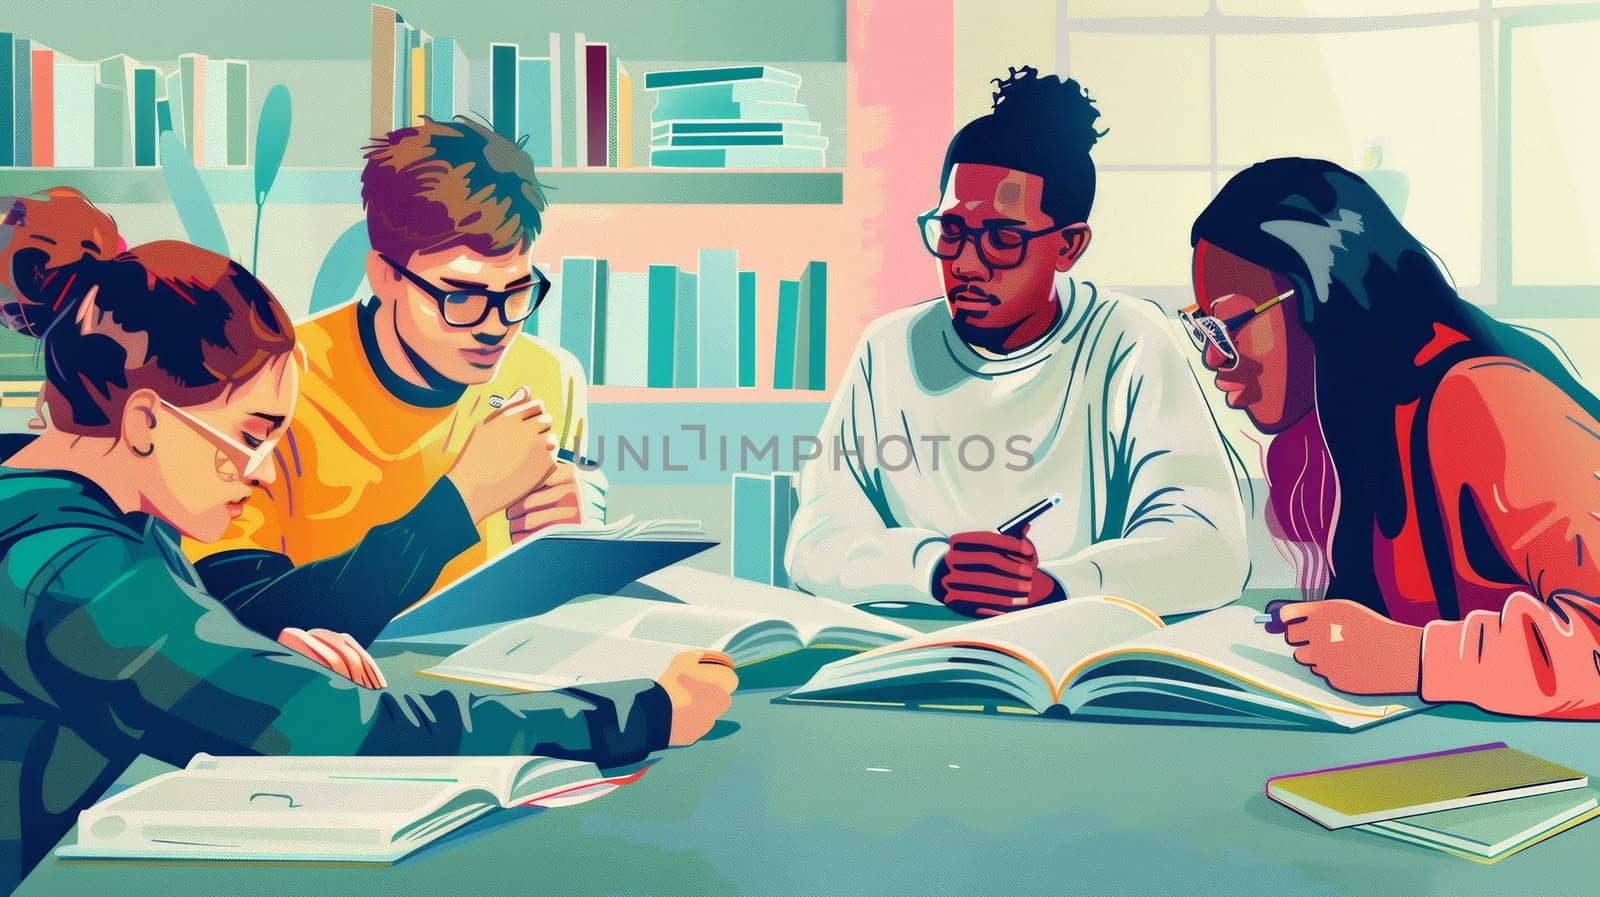 A diverse group of individuals engage in lively discussion while gathered around a book resting on the table.